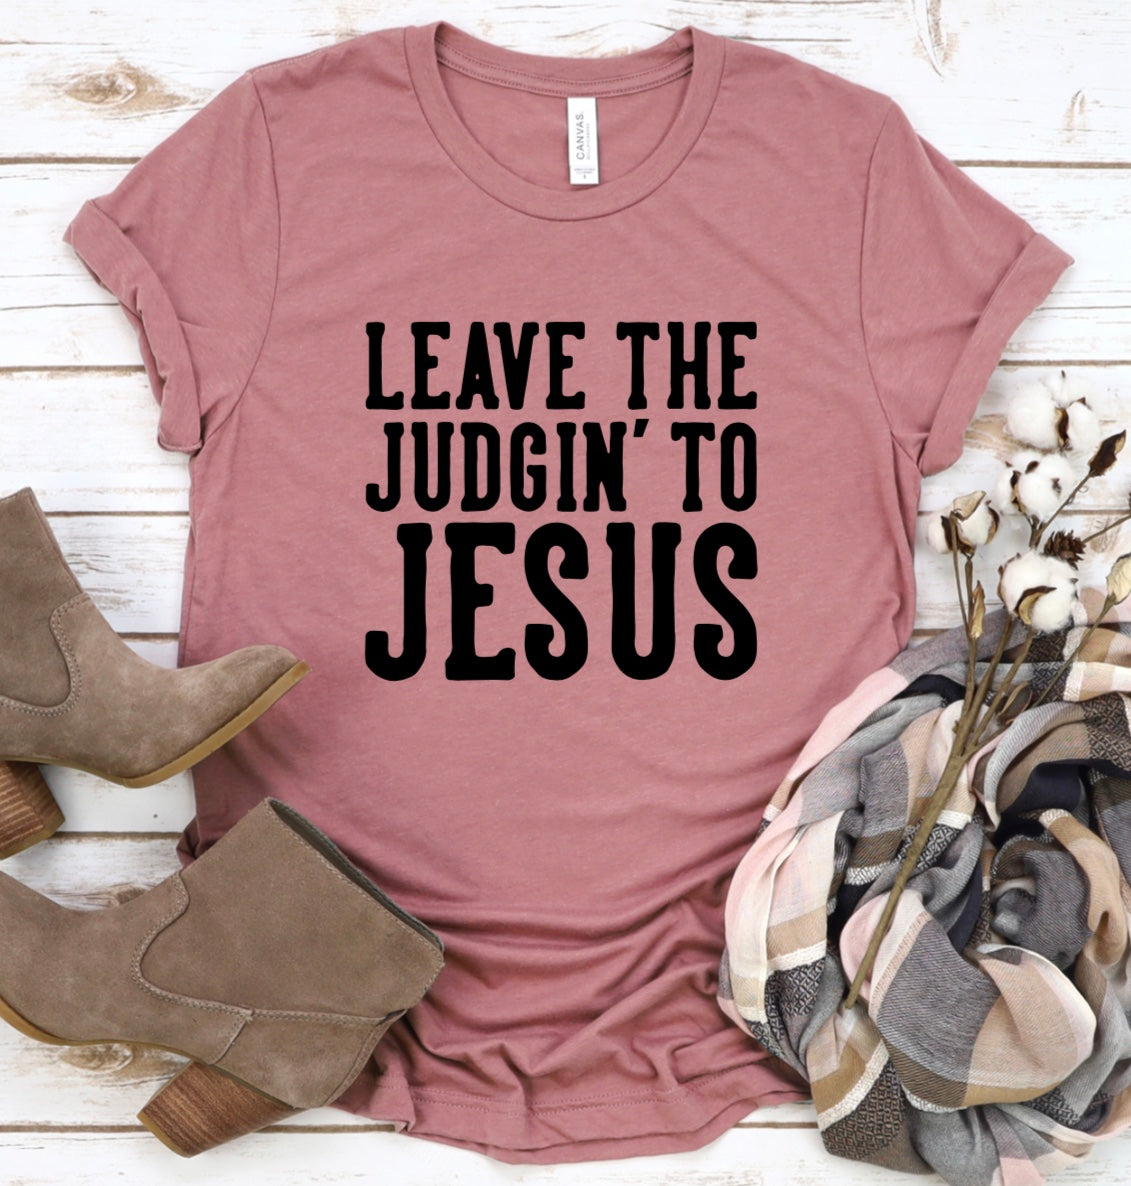 Leave the Judgin to Jesus t-shirt 